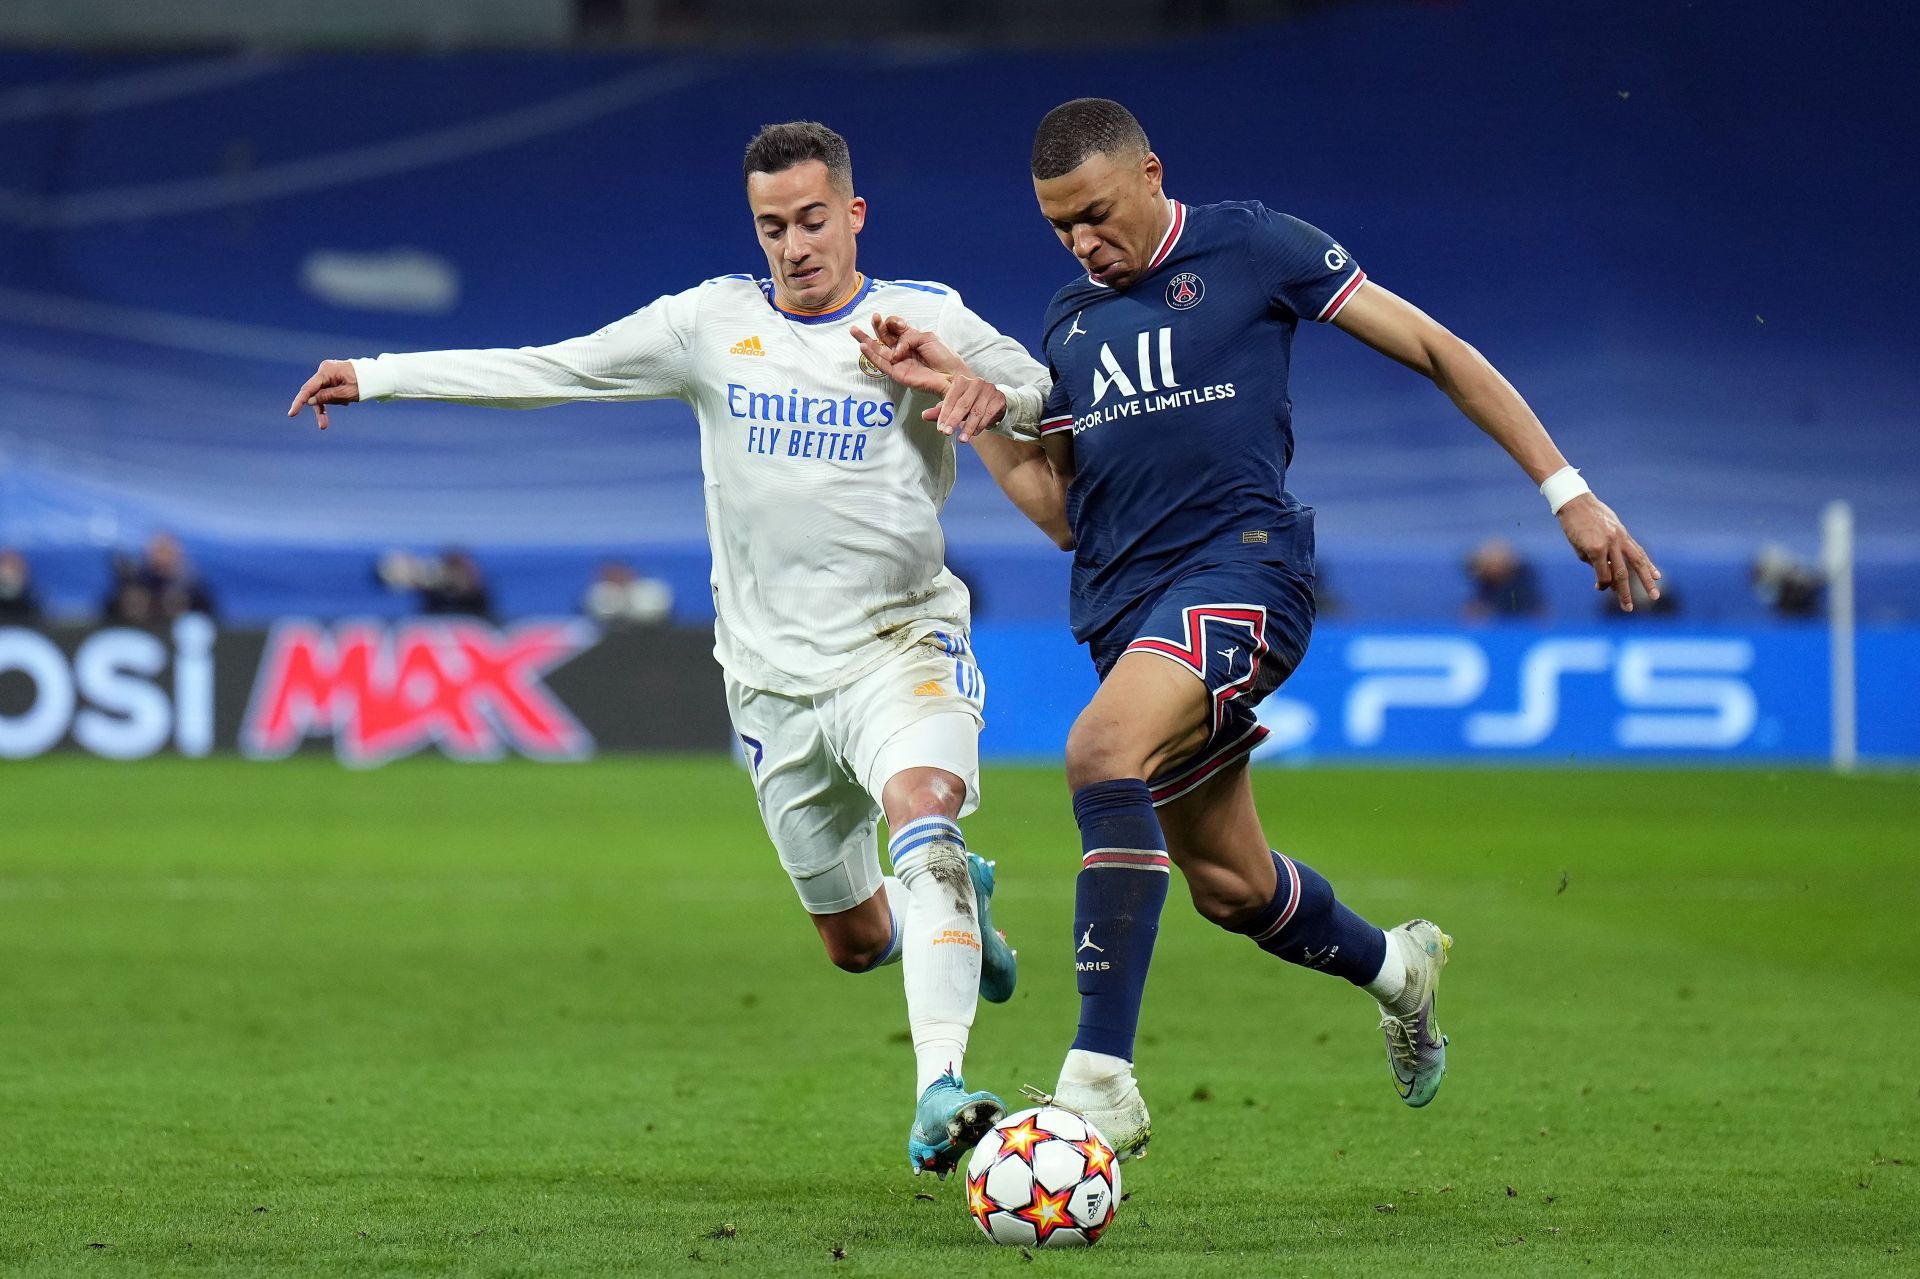 Mbappe in action during a clash with Real Madrid in the UCL round of 16 this season.